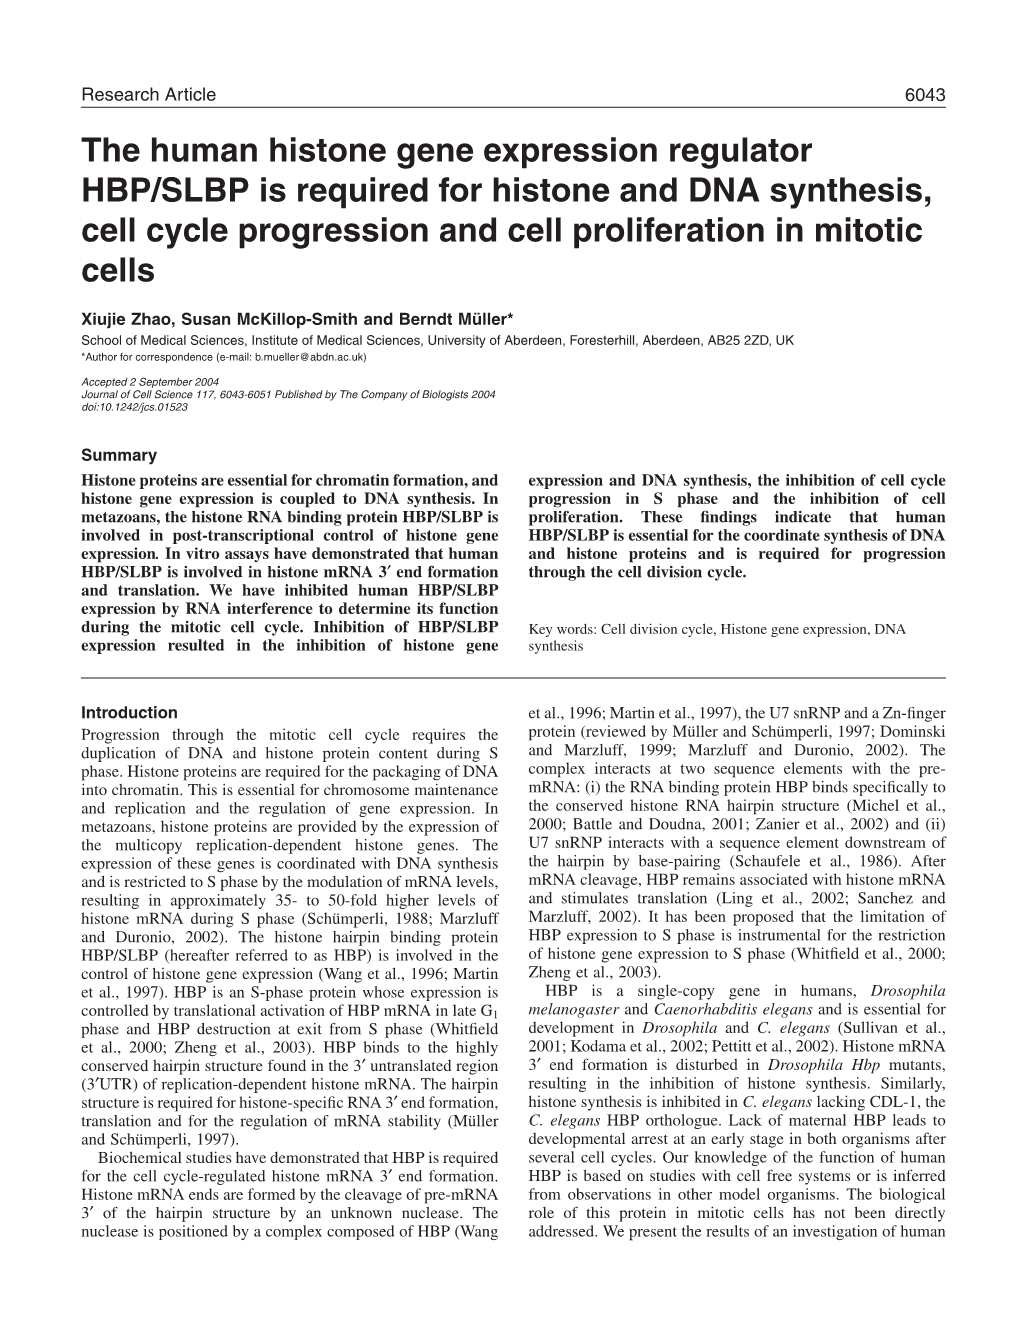 The Human Histone Gene Expression Regulator HBP/SLBP Is Required for Histone and DNA Synthesis, Cell Cycle Progression and Cell Proliferation in Mitotic Cells